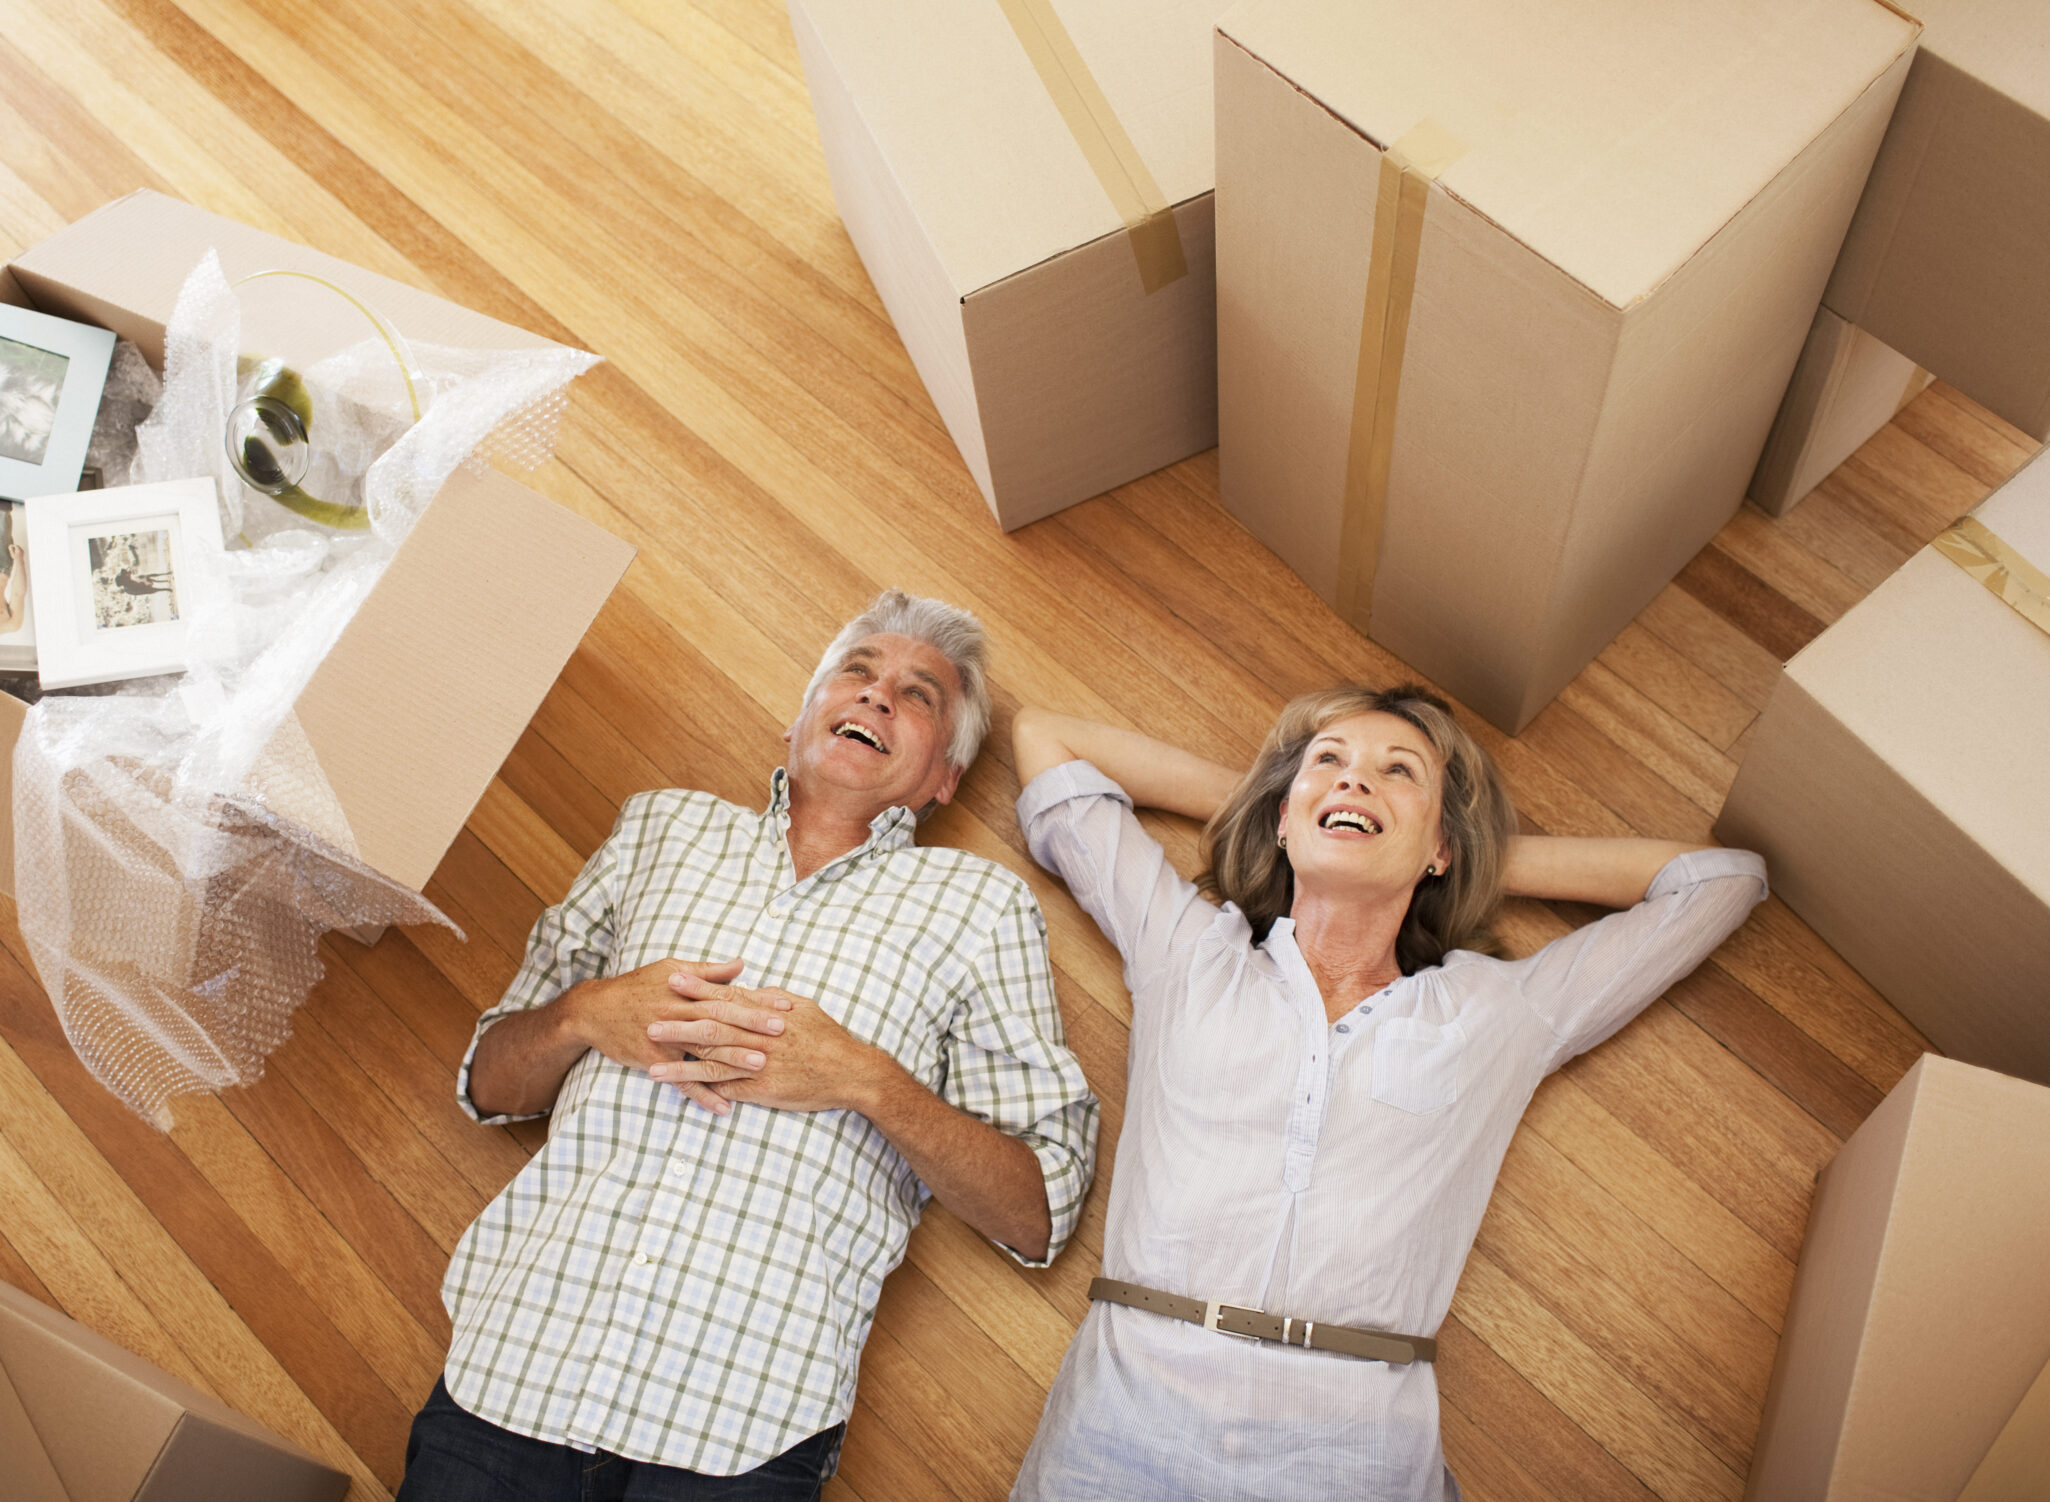 A couple lay on the ground and look up at the ceiling, surrounded by moving boxes